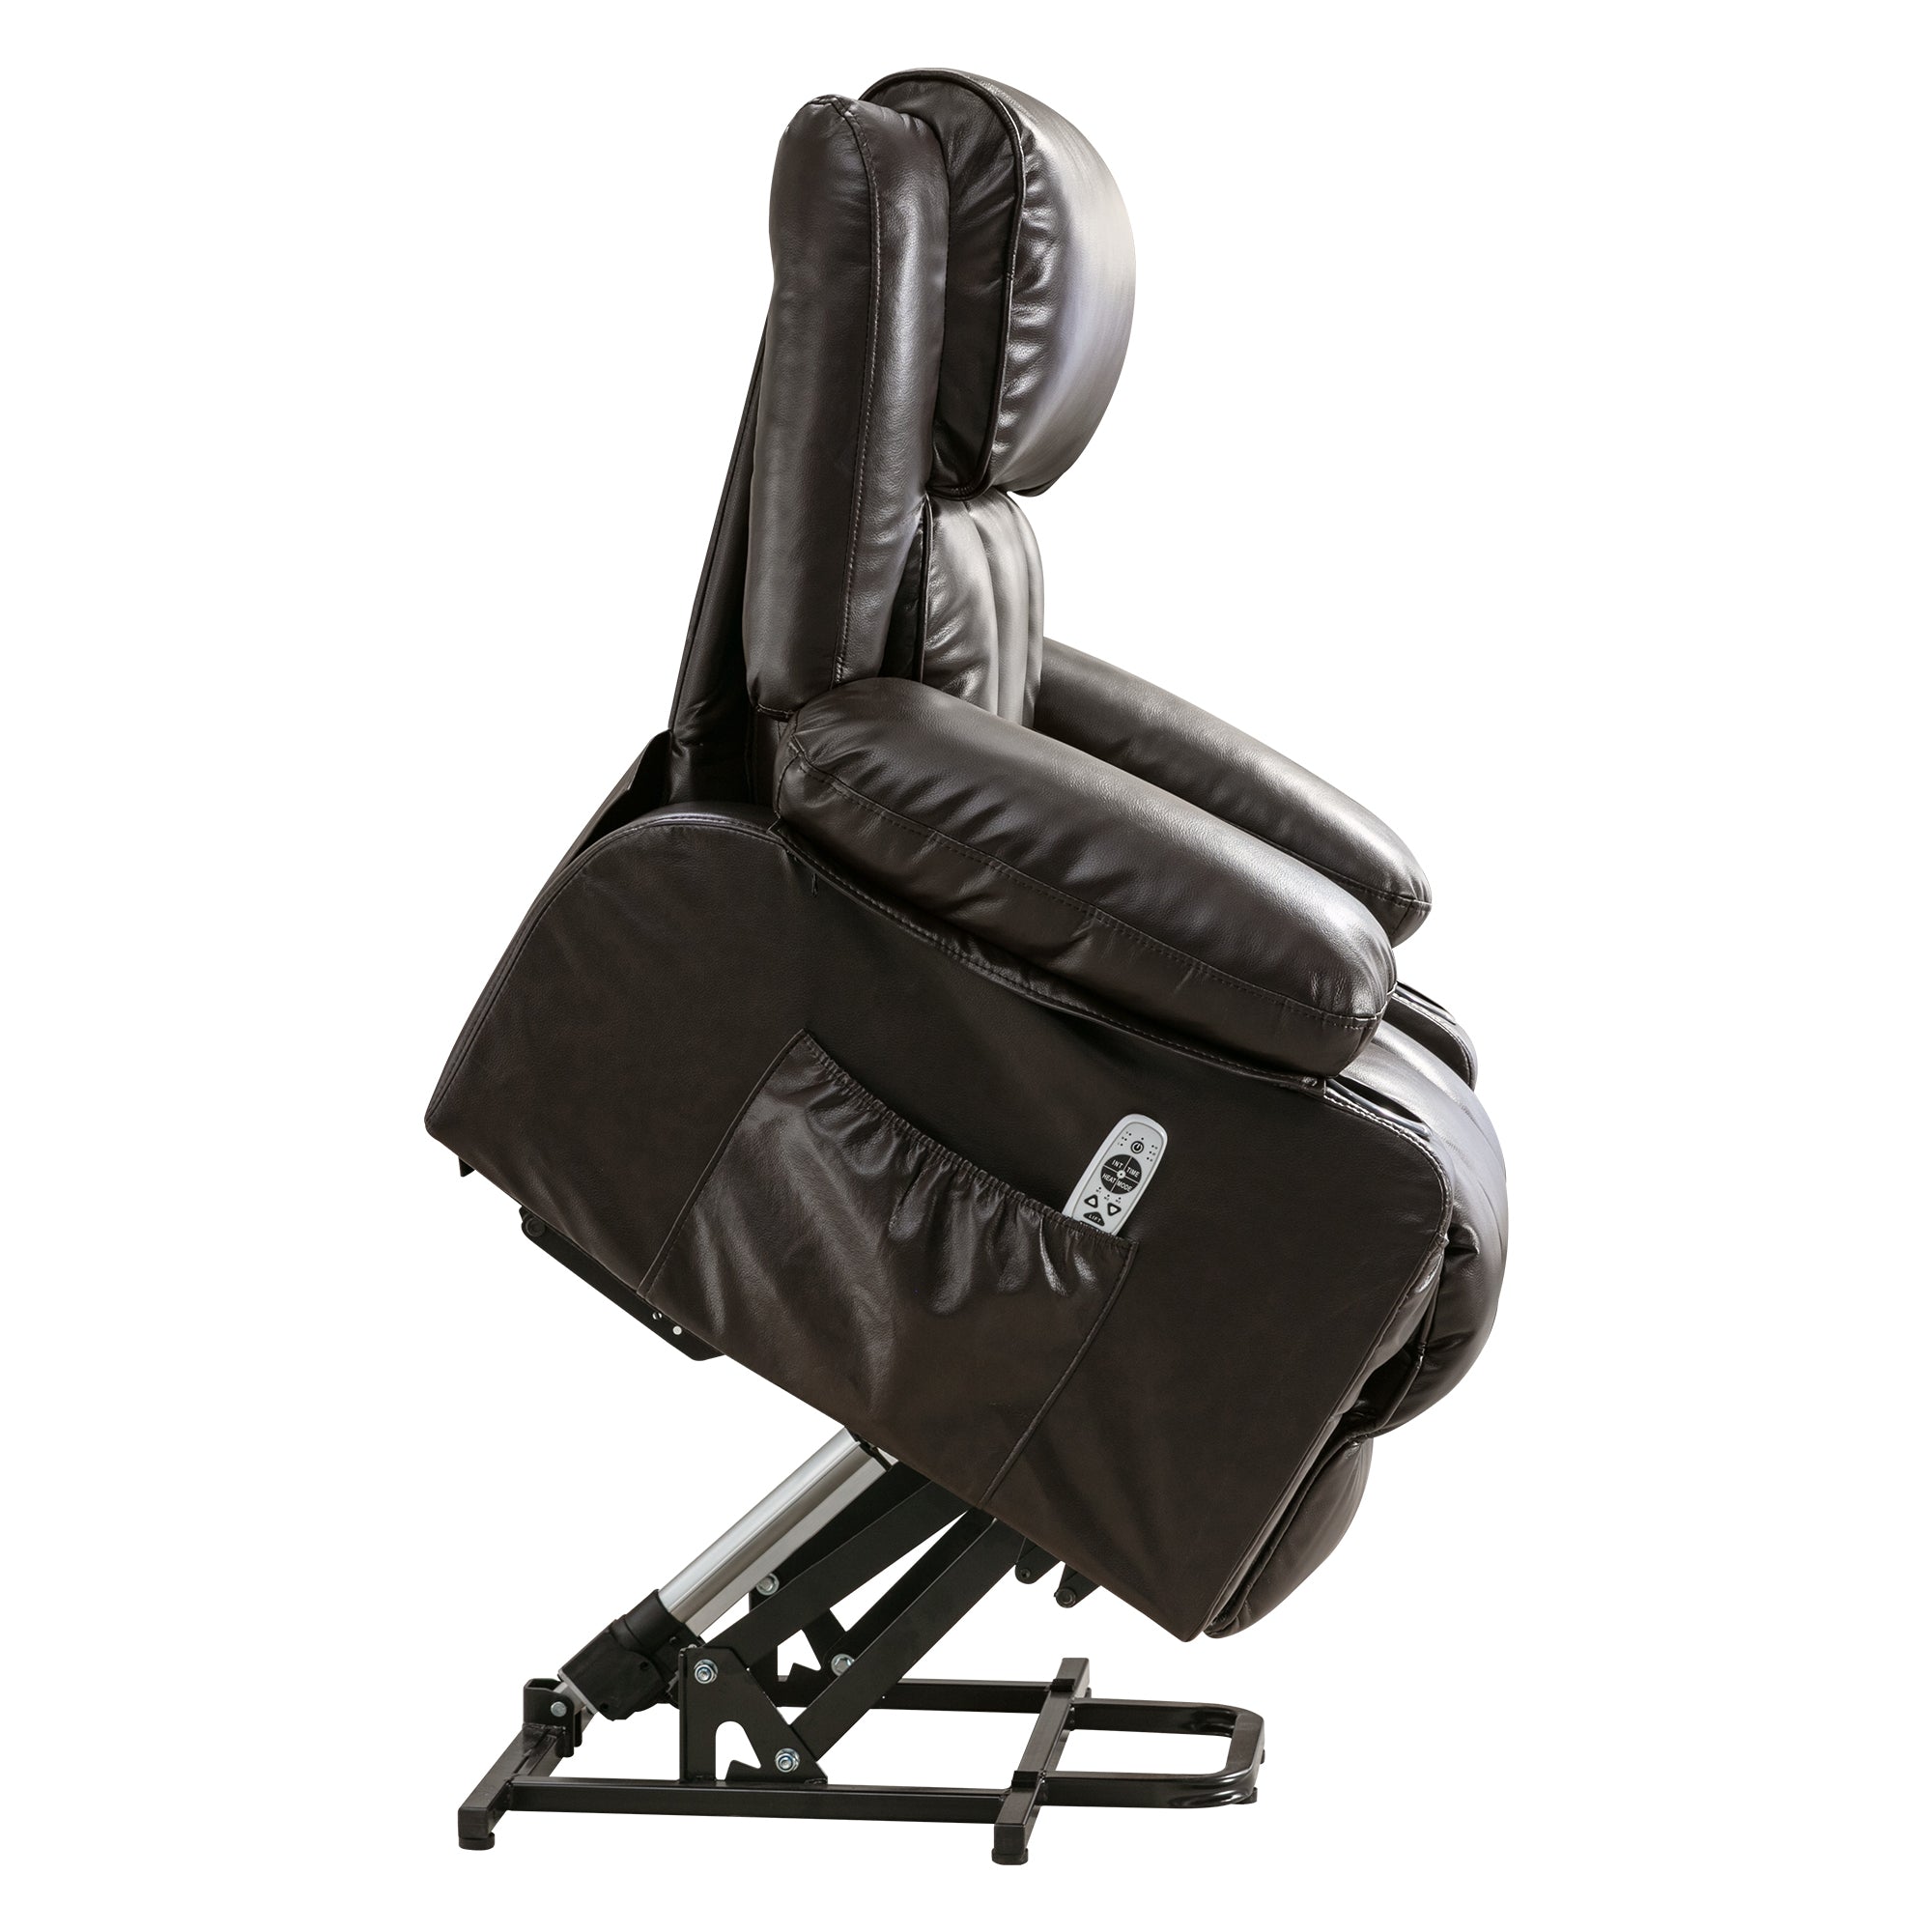 Power Lift Recliner Chair Recliners for Elderly with brown-power-push button-soft-heavy